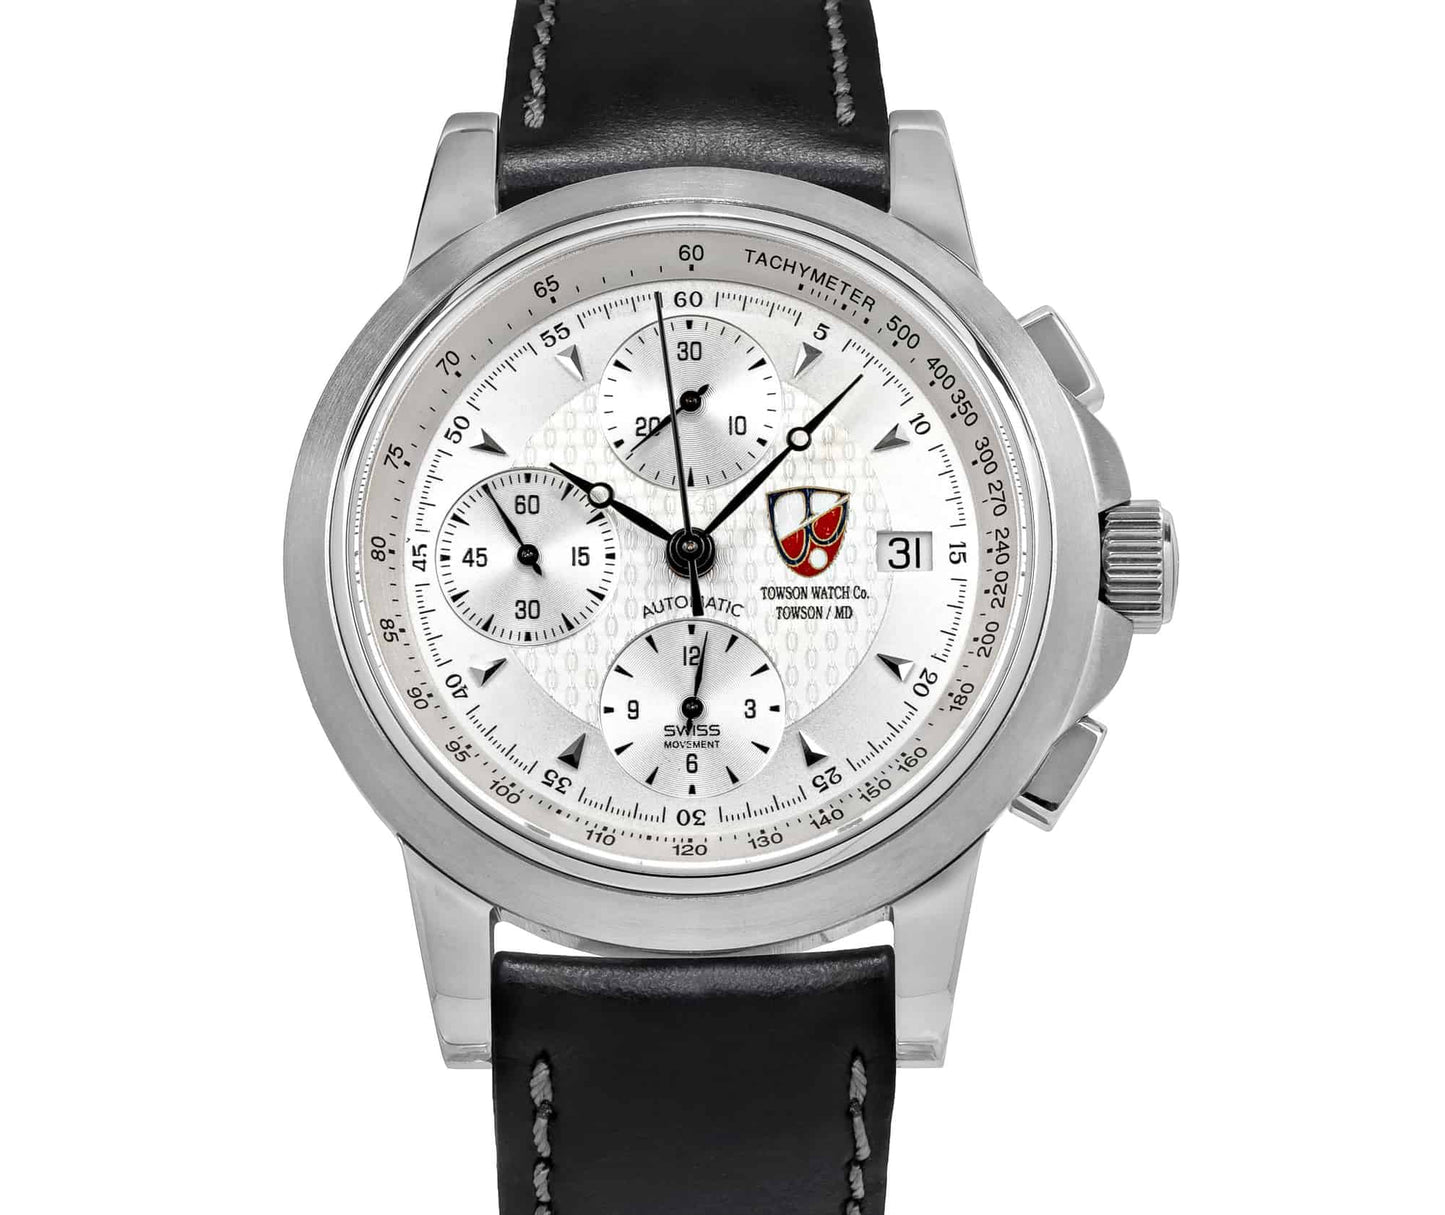 Towson Watch Company - M250-S2 Moon mission - Maple City Timepieces